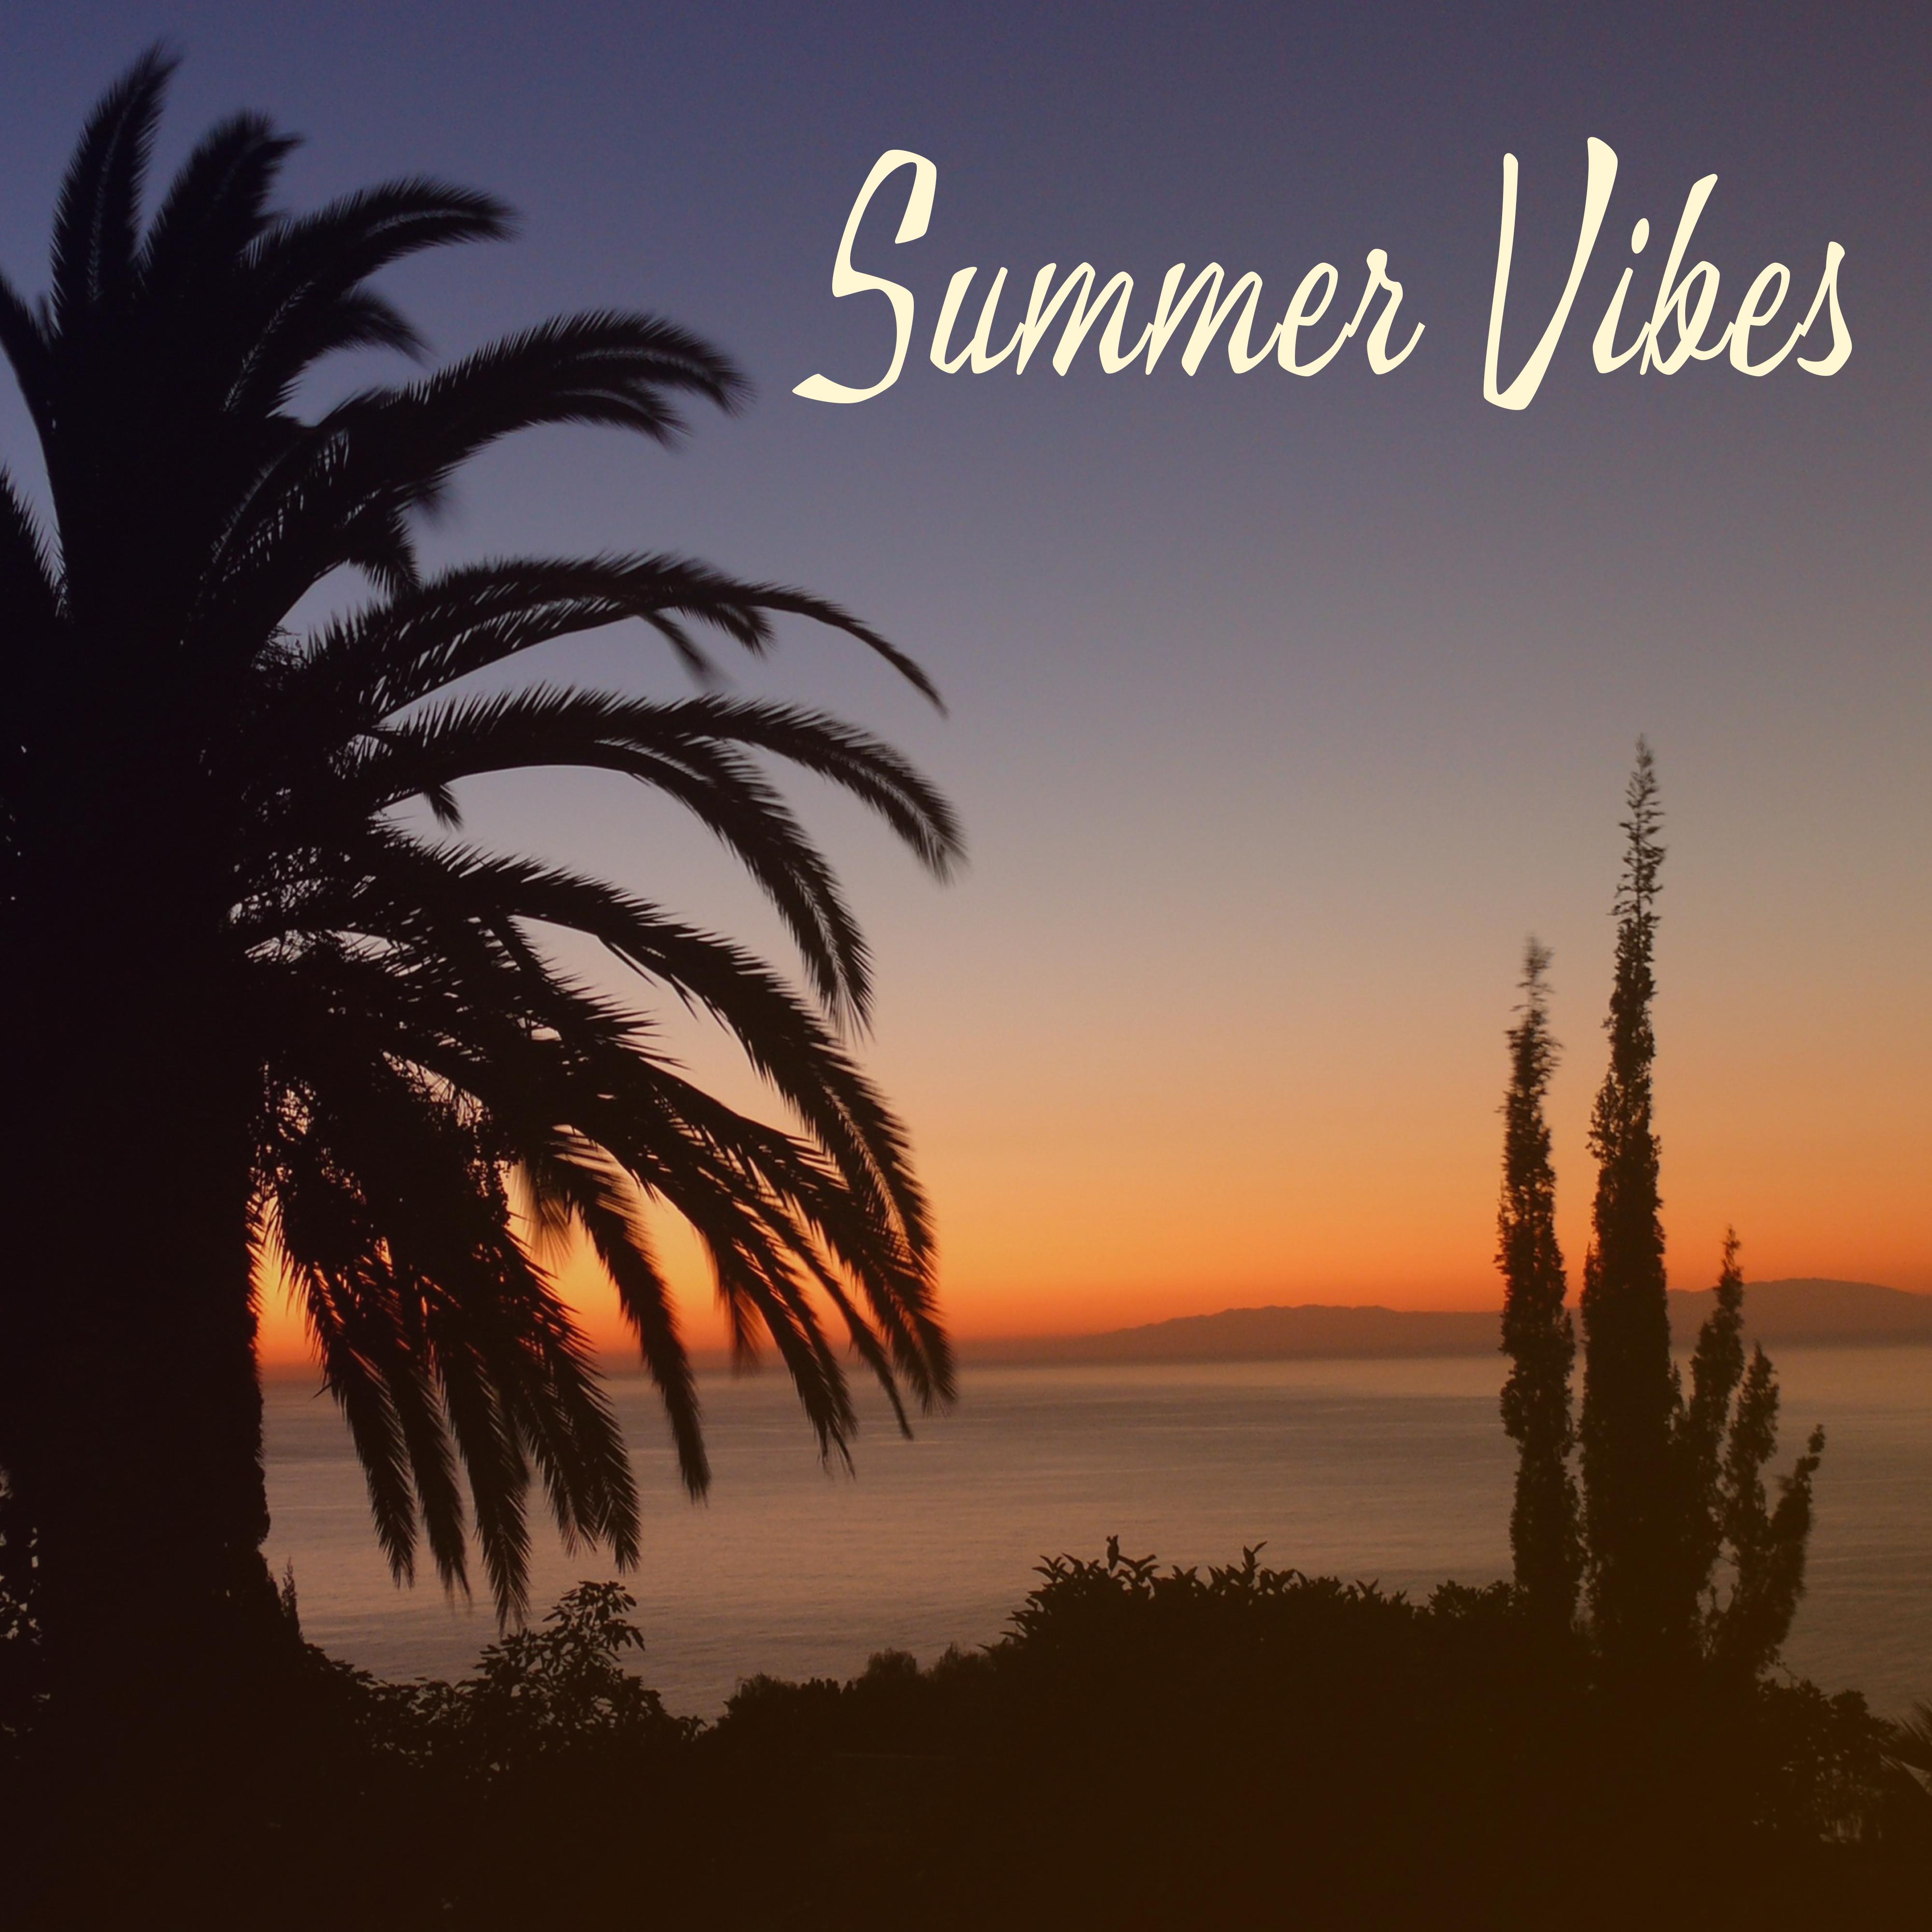 Summer Vibes – Holiday Chill Out Music 2017, Beach Party, Ibiza Lounge, Tropical Chill, Good Mood, Positive Energy